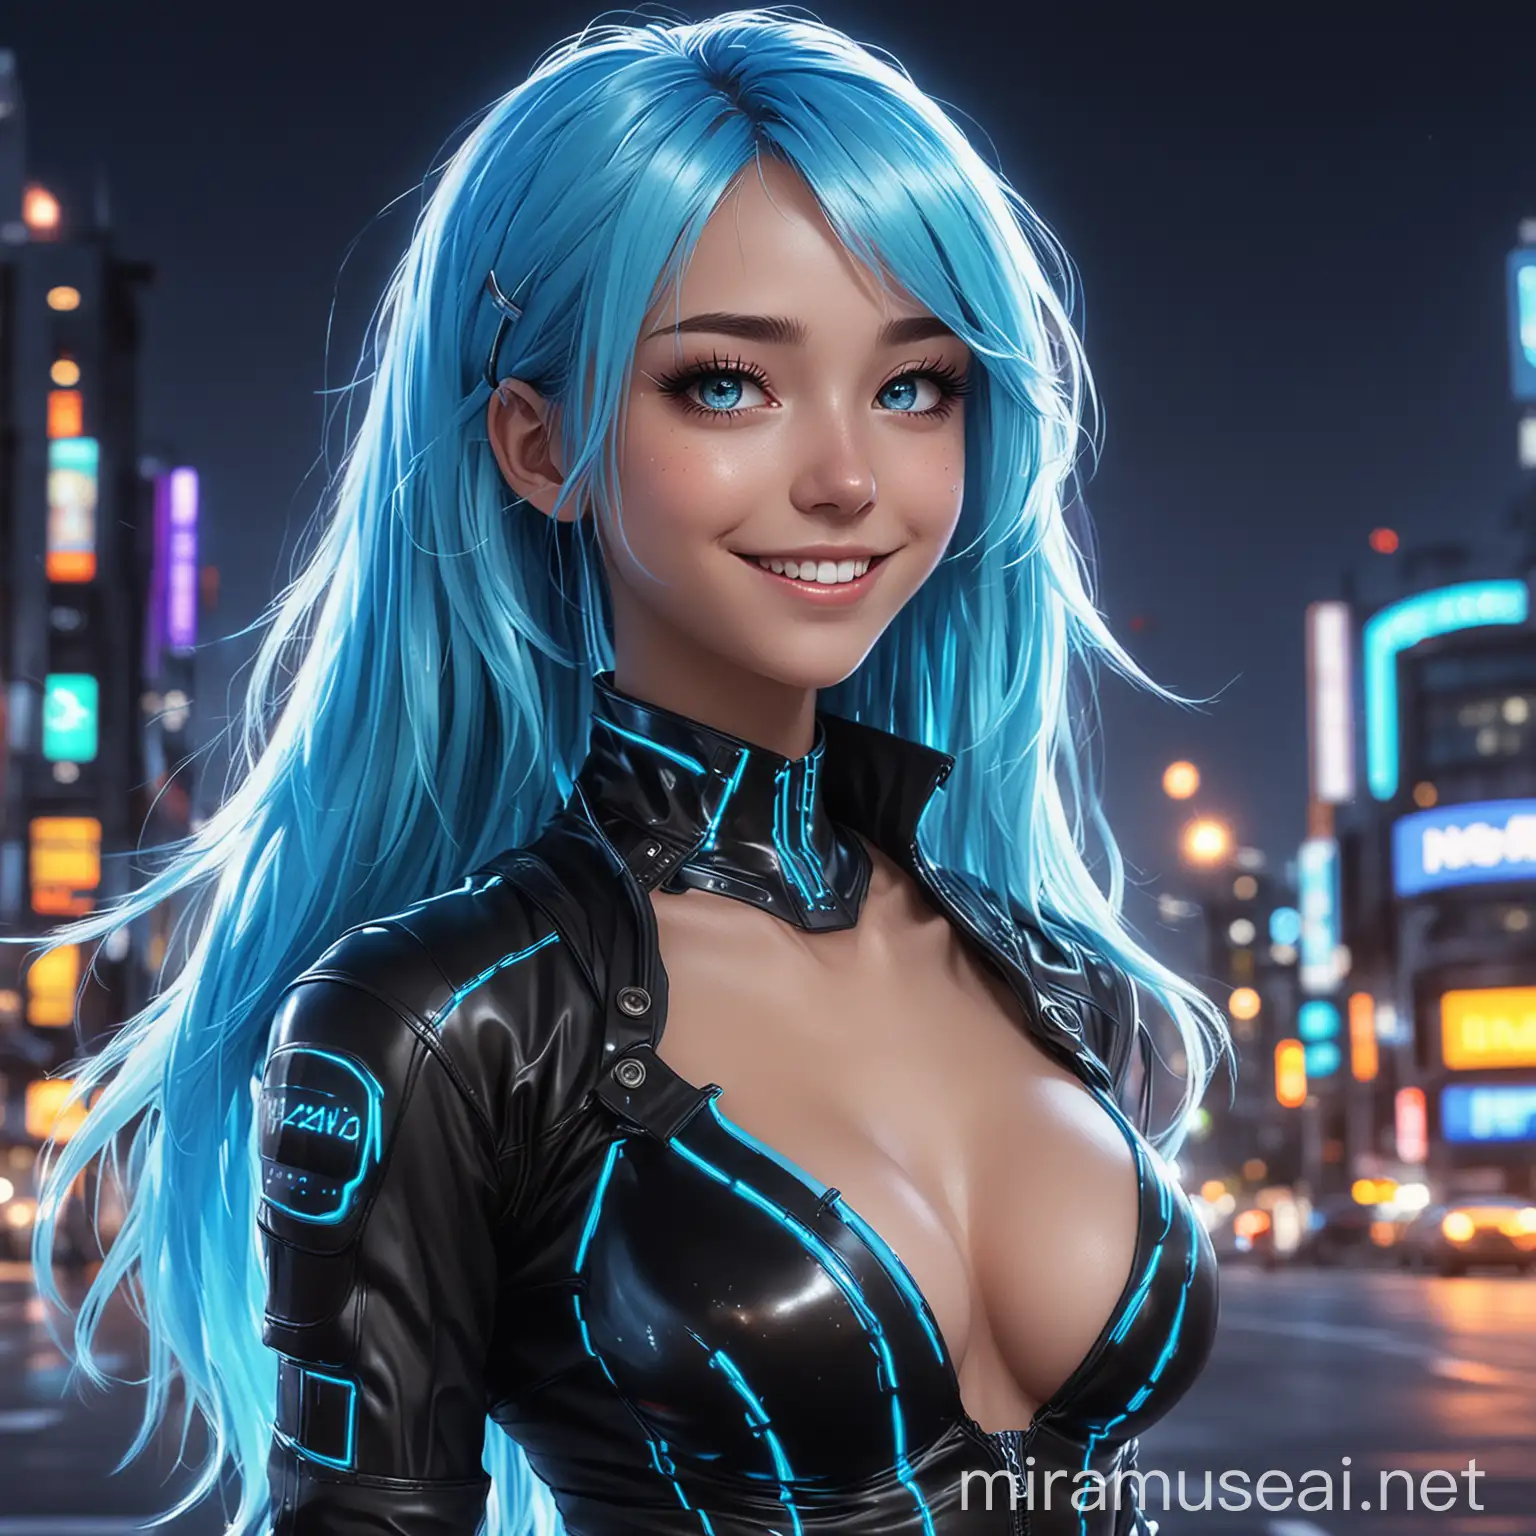 Futuristic Anime Girl with Neon Blue Hair in Tron Suit Cyberpunk Cityscape Portrait